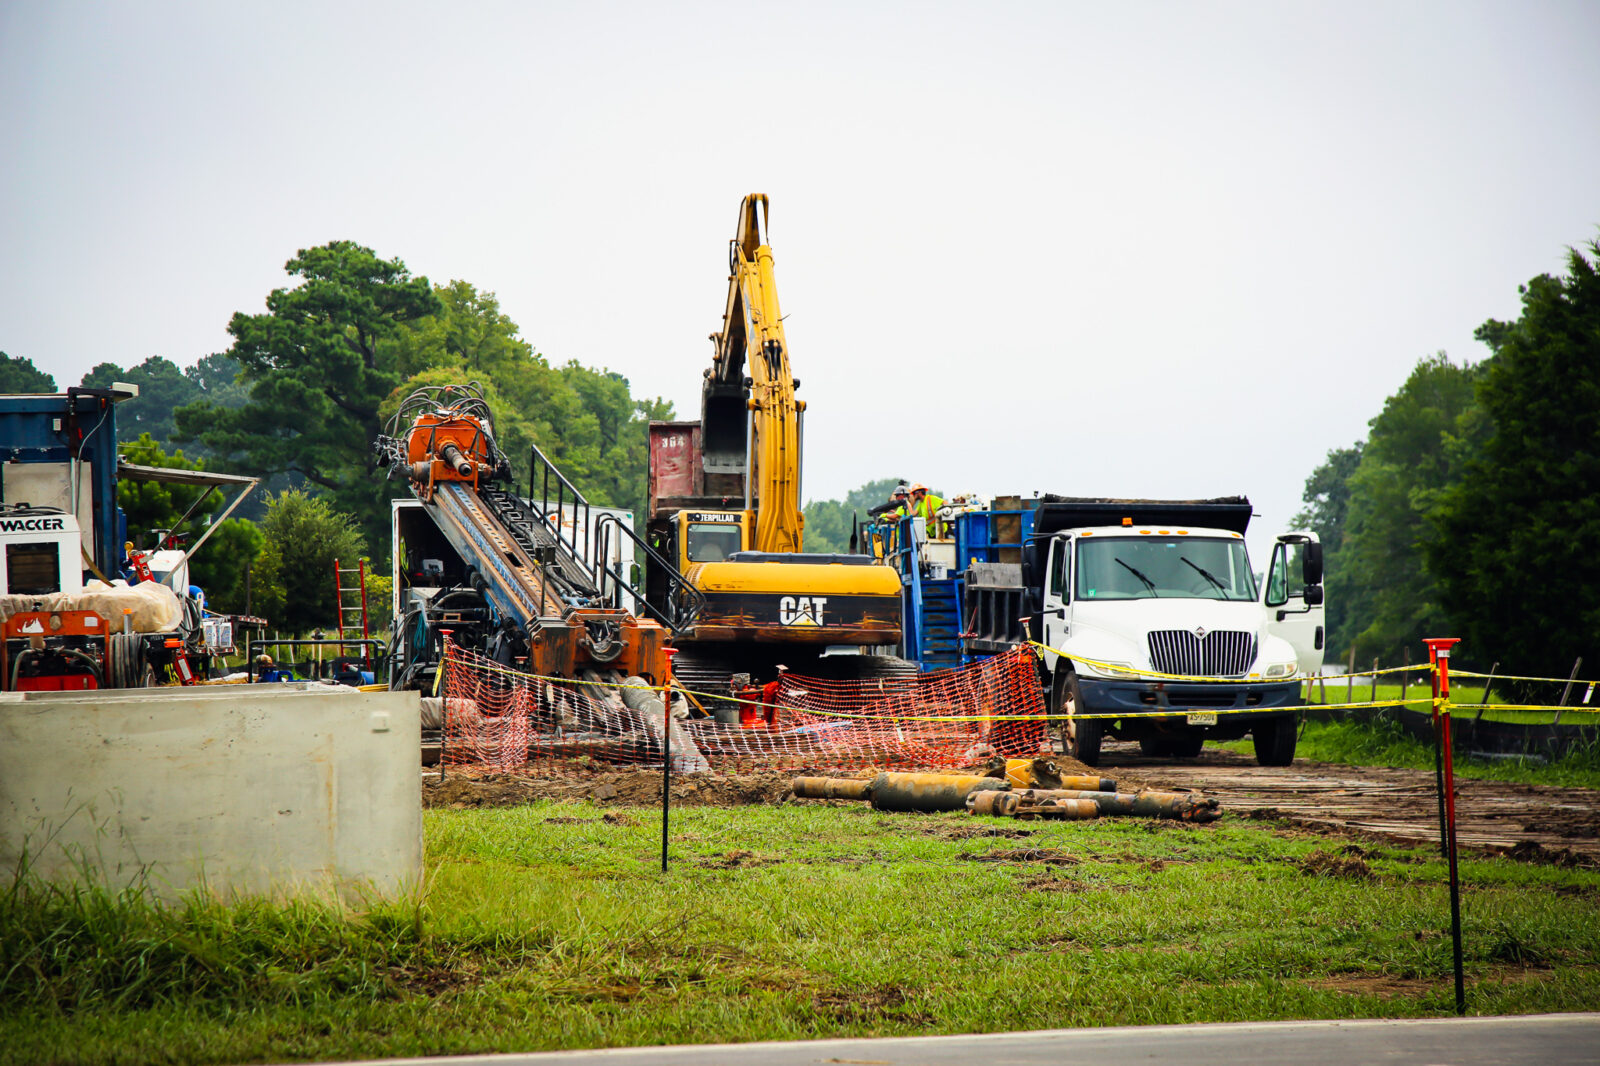 Trucks and heavy machinery staging on job site